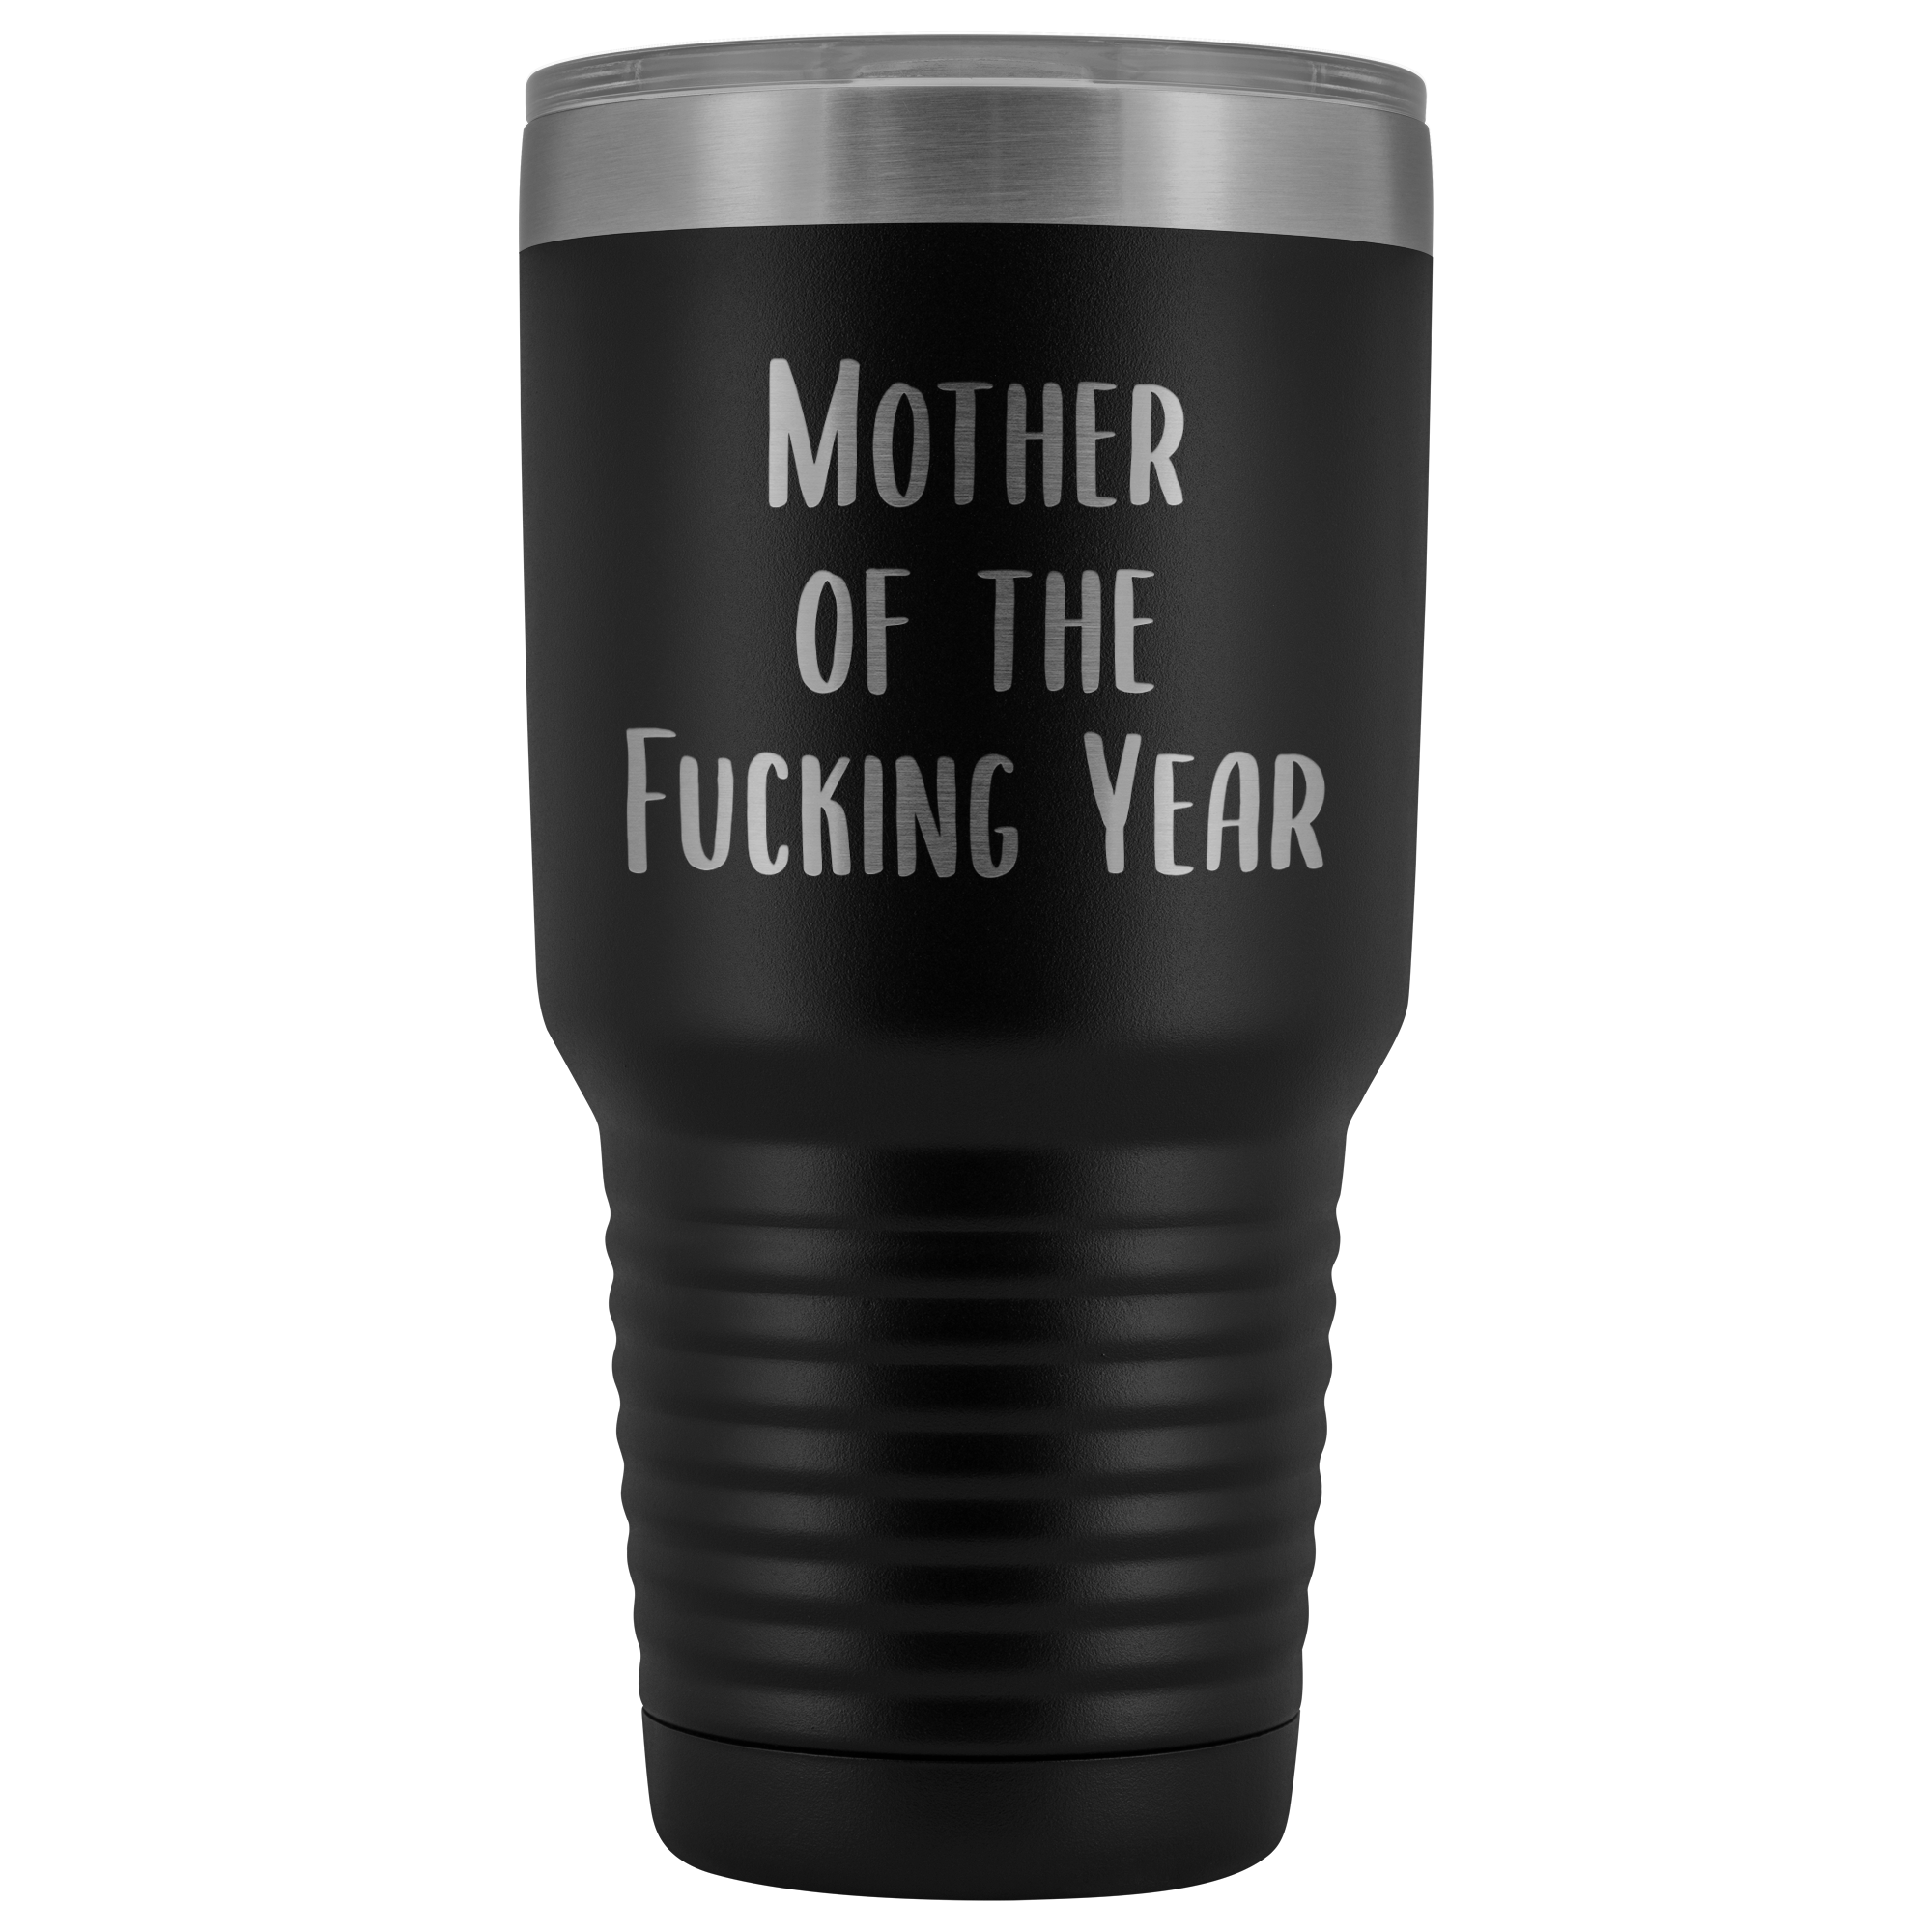 Funny Mother's Day Tumbler Mother of the Fucking Year Mug Mom Gifts Mature Swearing Metal Insulated Hot Cold Travel Coffee Cup 30oz BPA Free